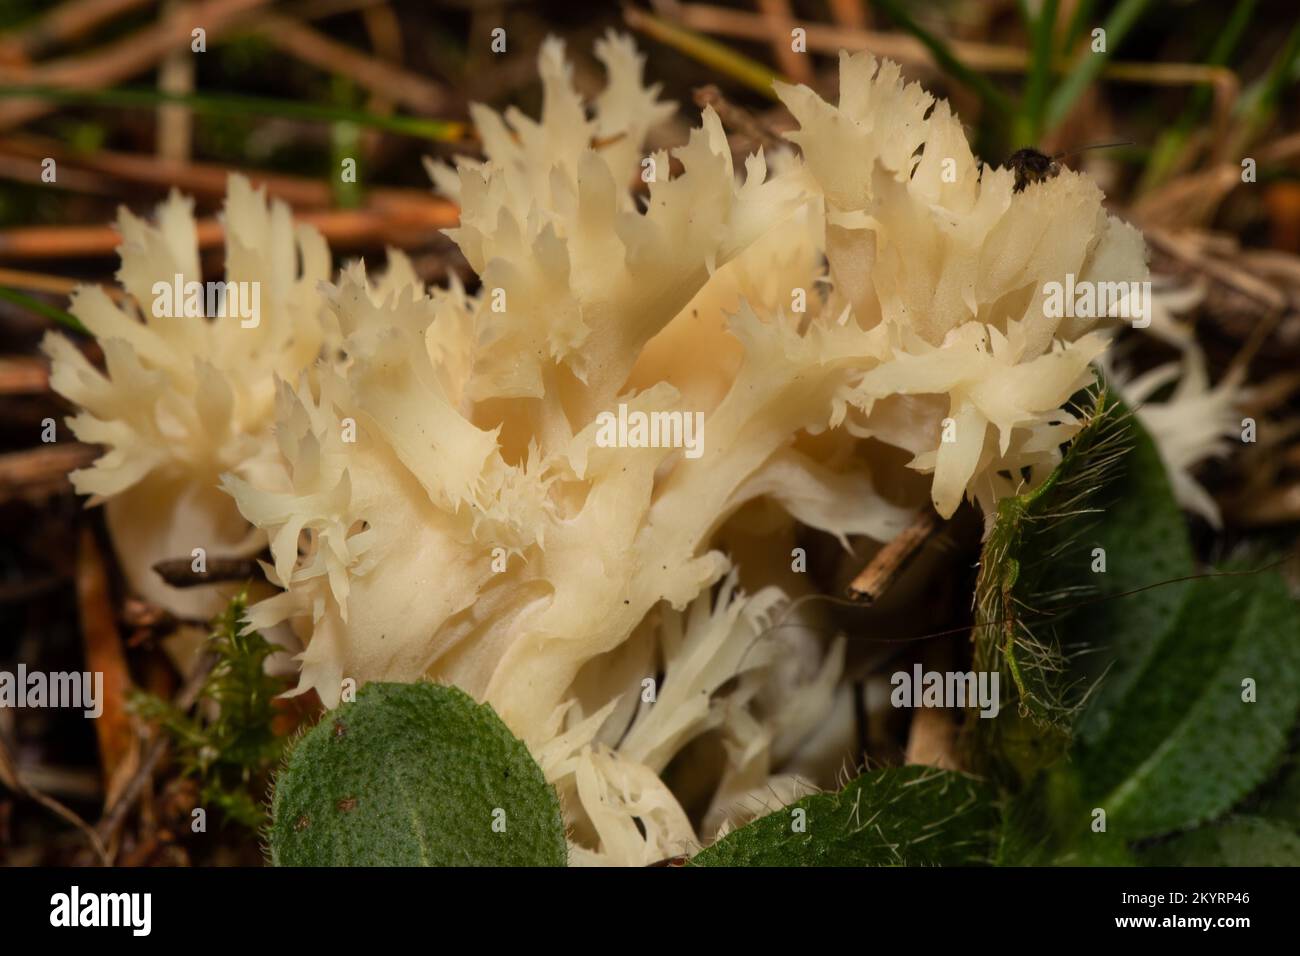 Comb coral fruiting body some brown-white branches Stock Photo